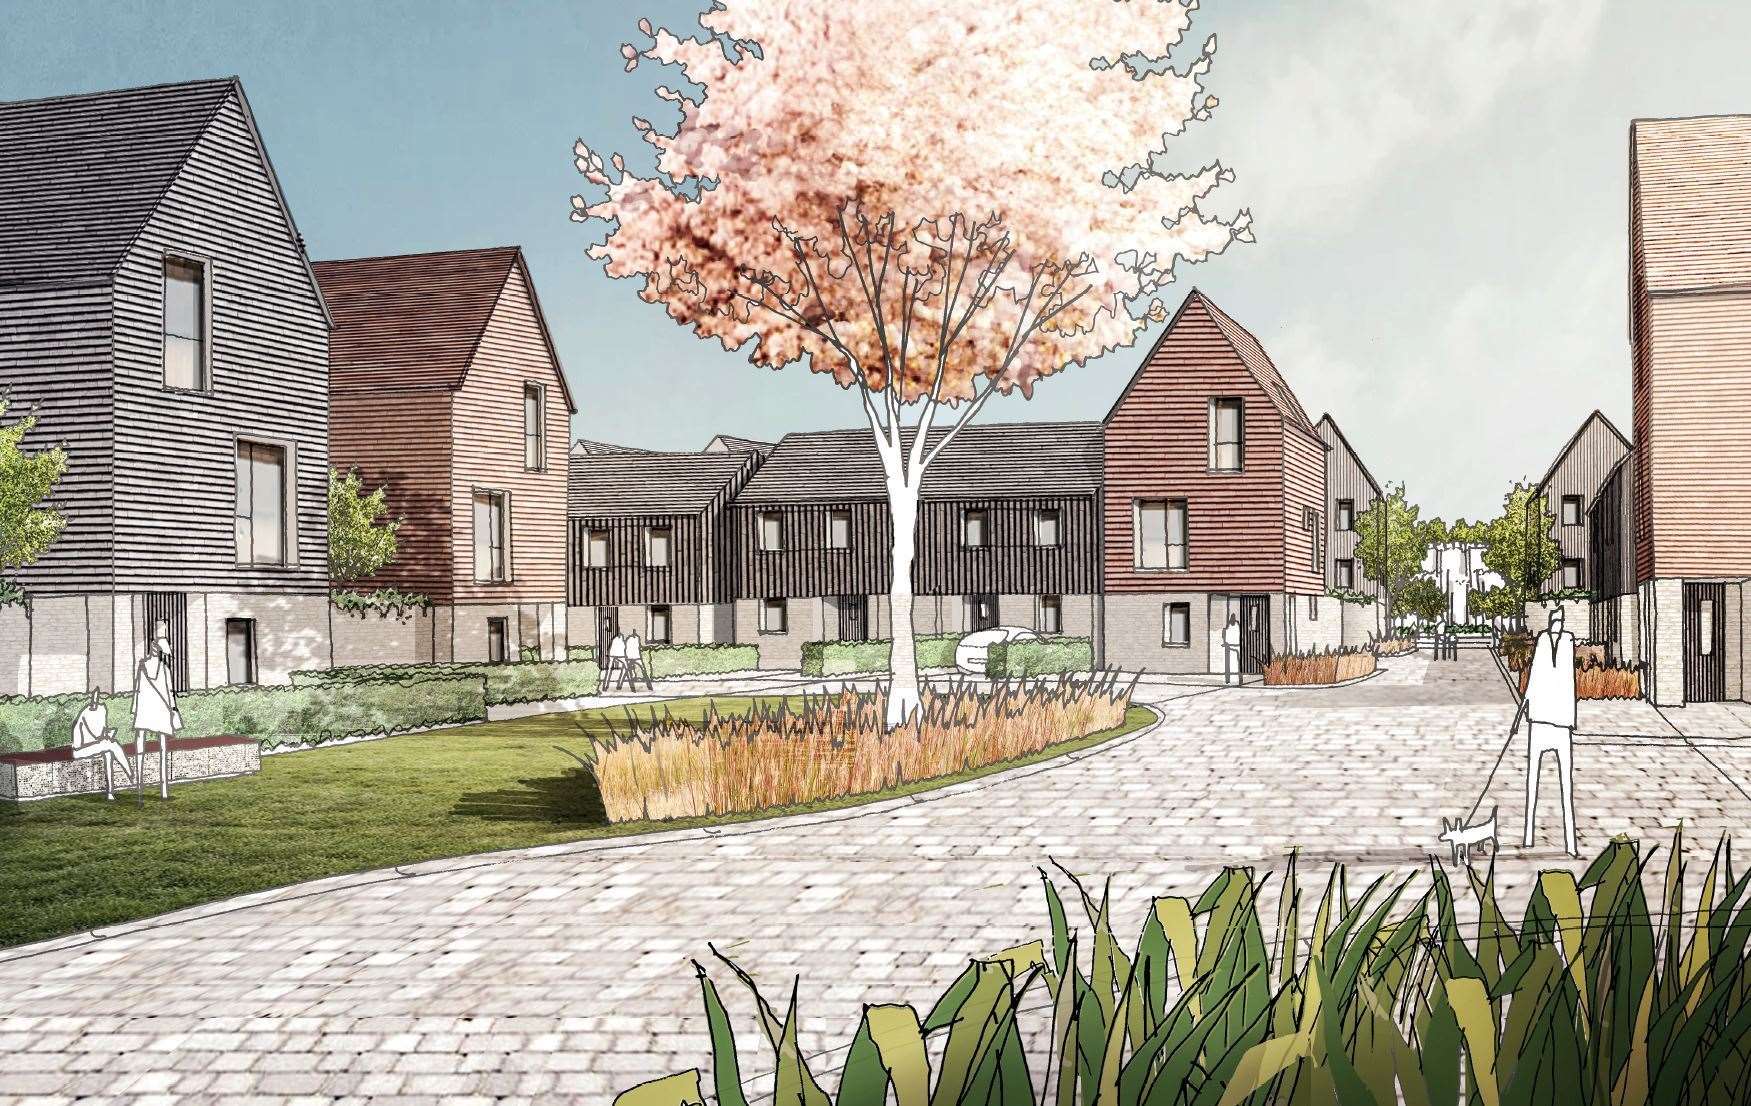 The first development of 281 homes in the Ashmere village have been approved by Ebbsfleet Development Corporation planners